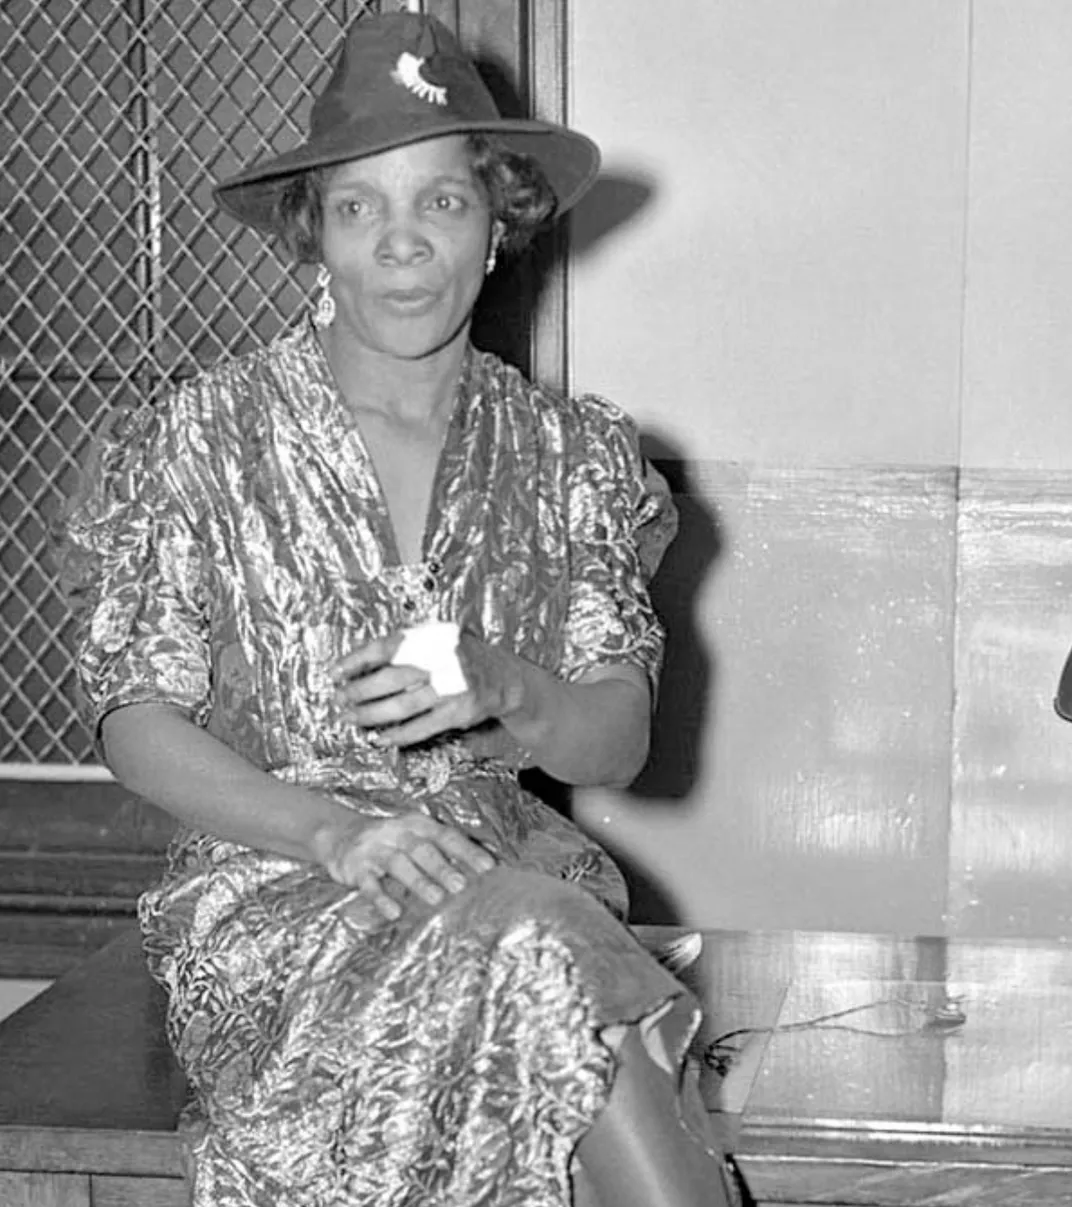 Stephanie St. Clair photographed while under arrest